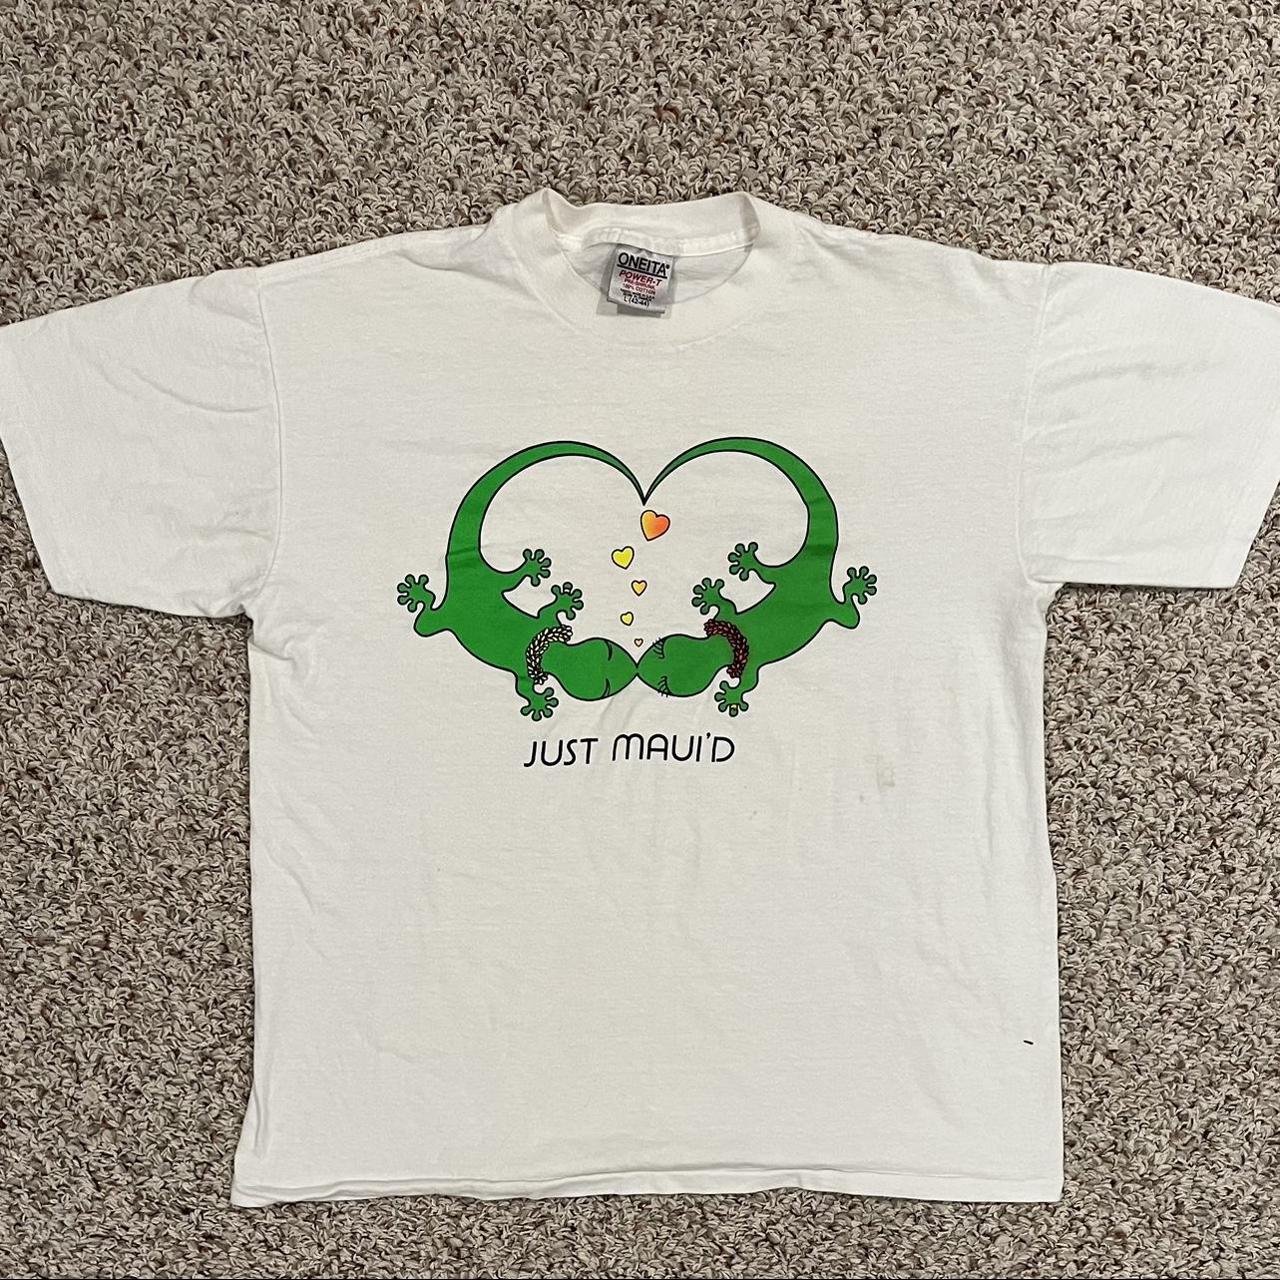 Men's White and Green T-shirt